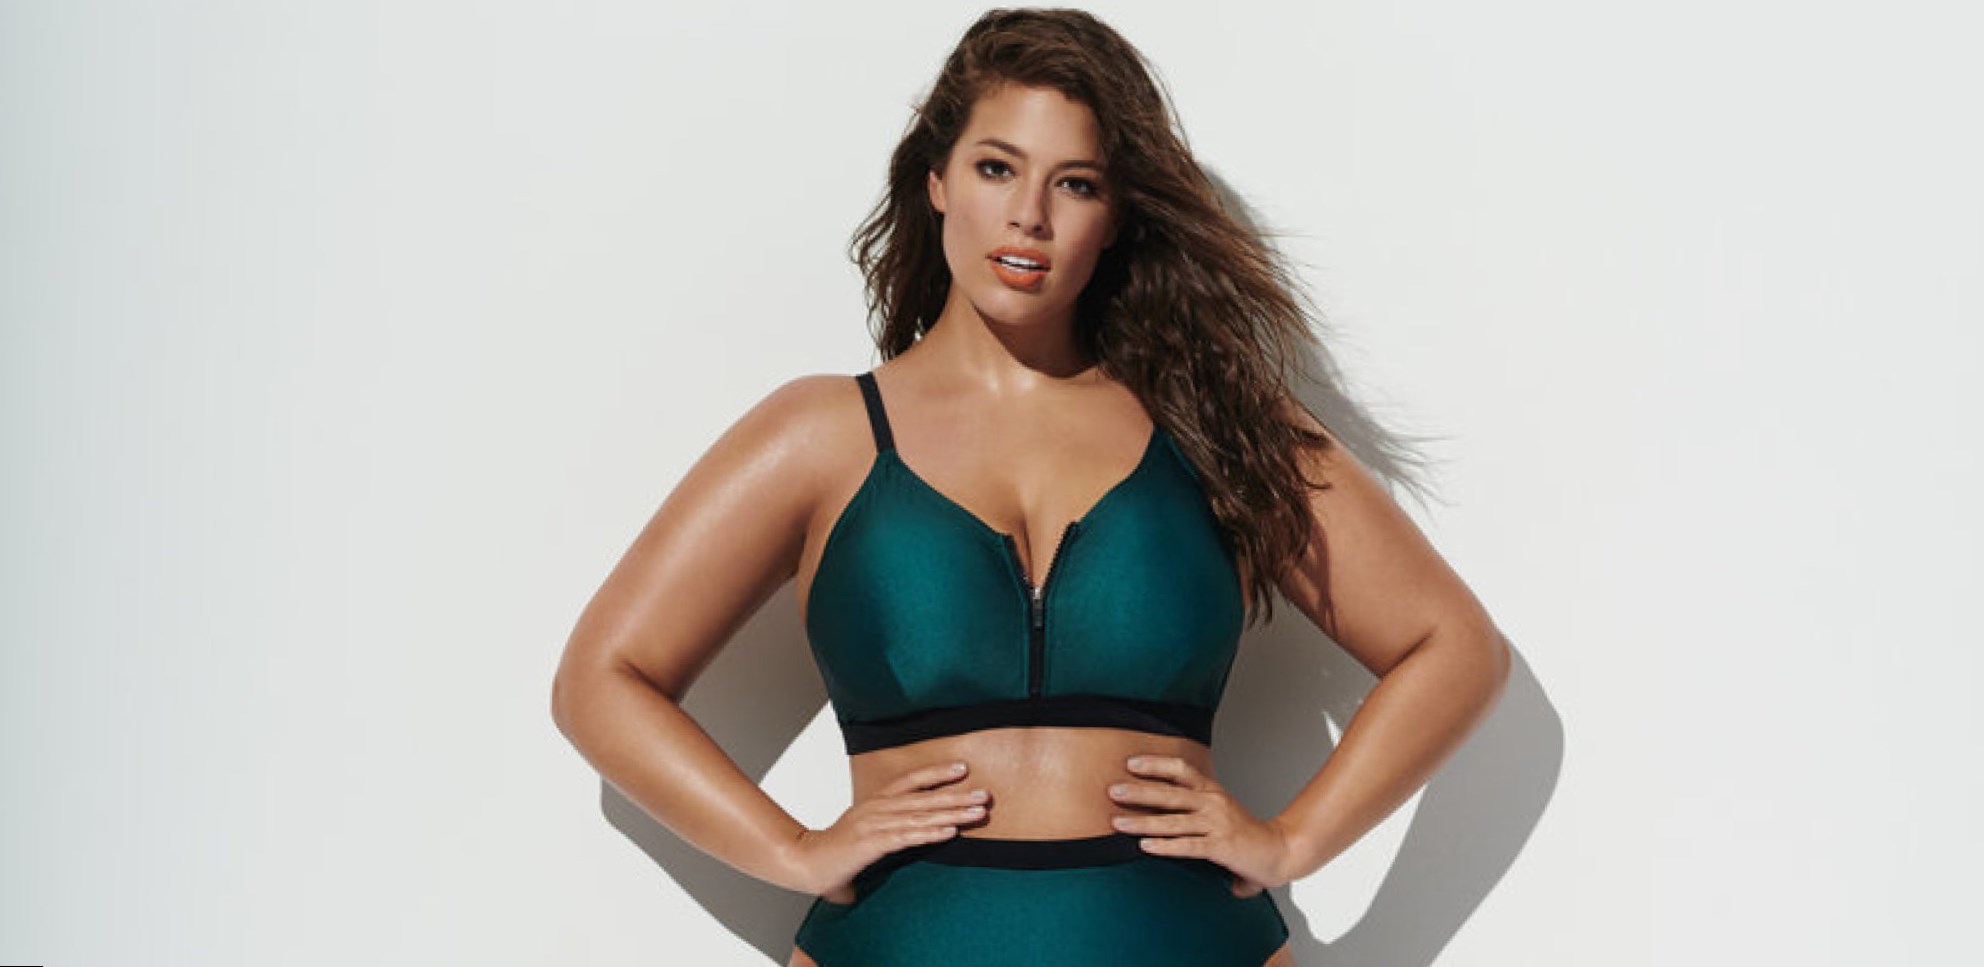 Ashley Graham Height, Weight and Body Measurements